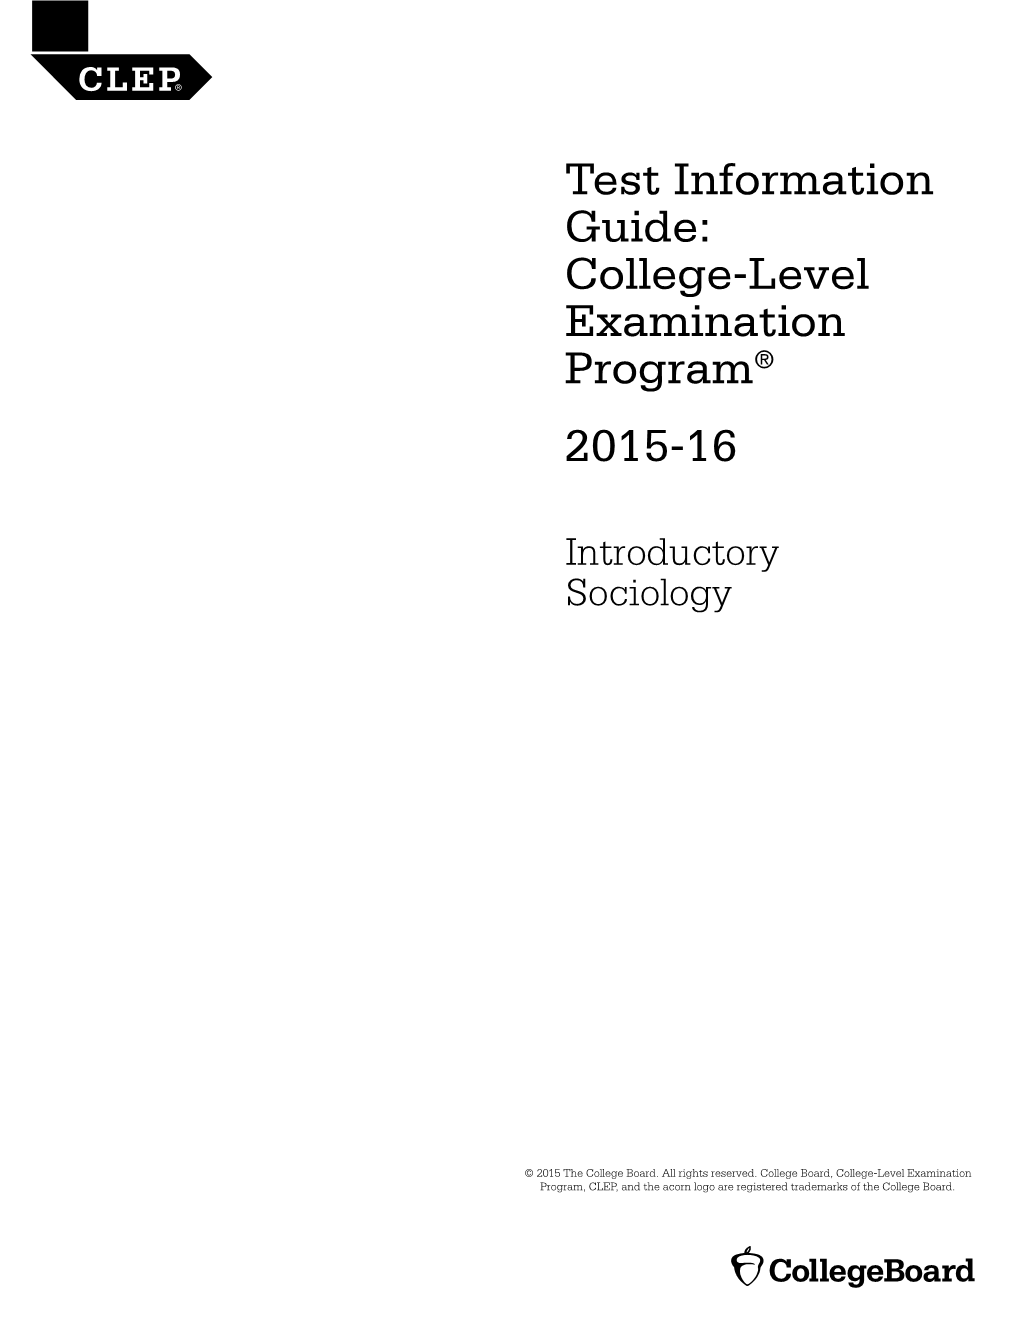 CLEP Introductory Sociology Test Information Guide – the College Board